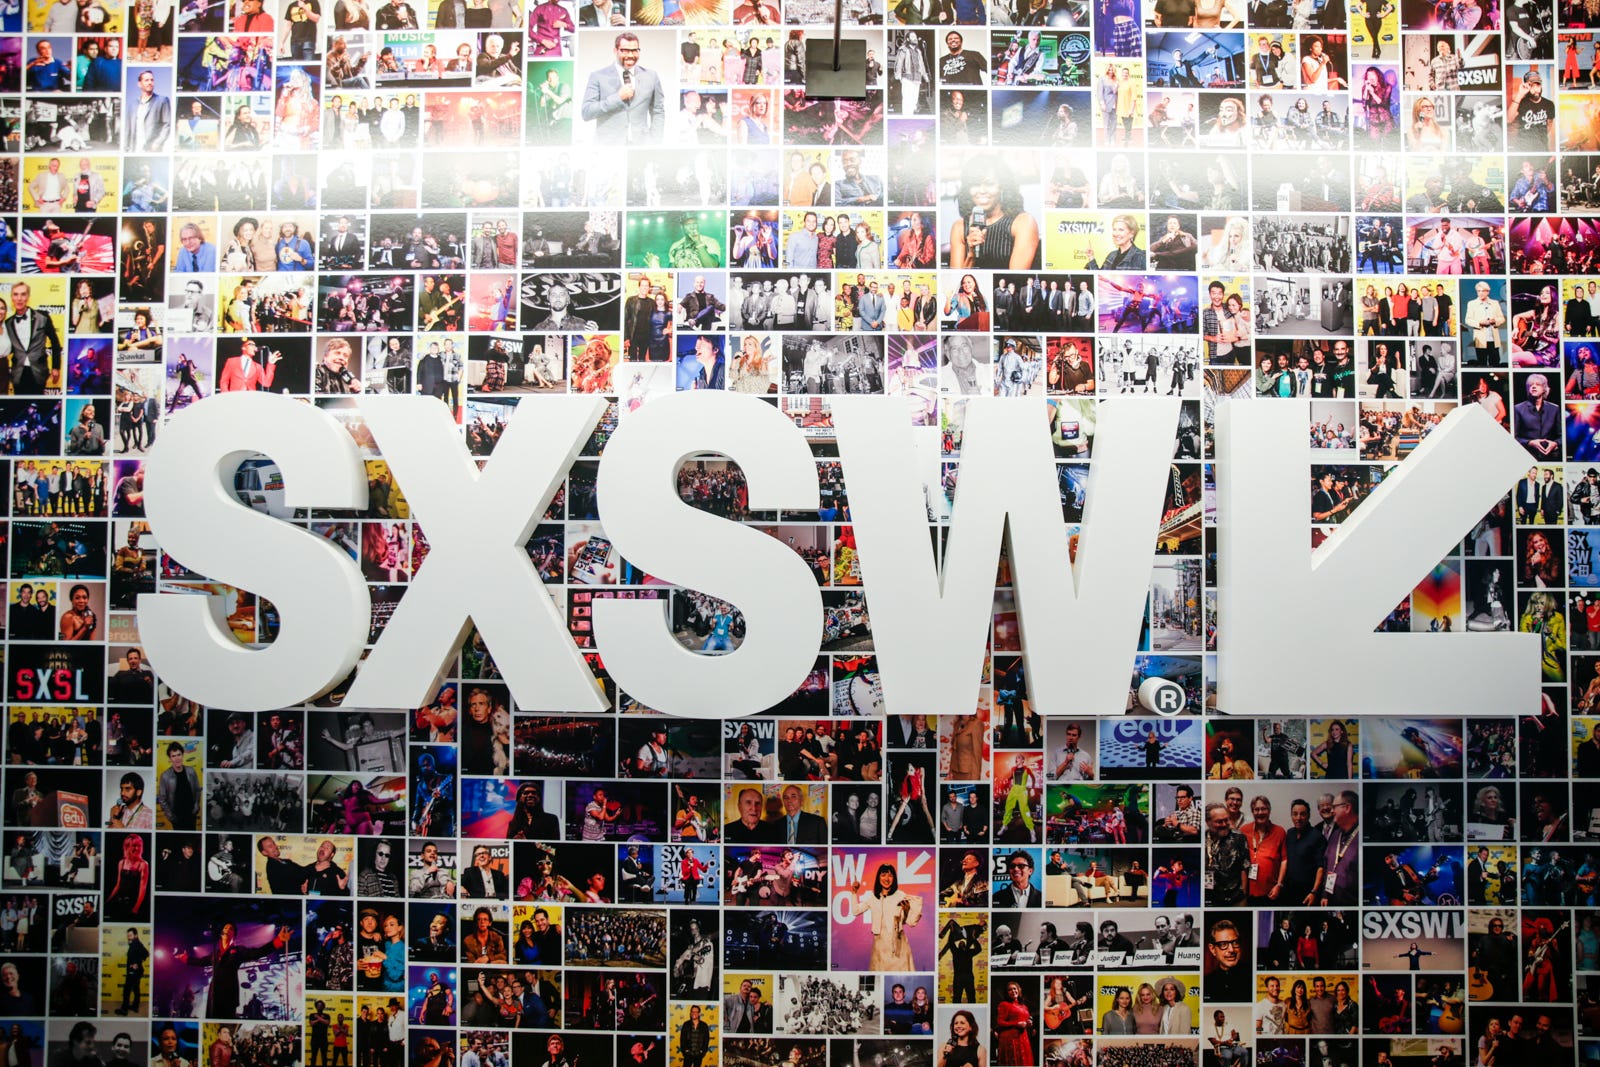 This year's South by Southwest Conference and Festivals will take place digitally as the SXSW Online event.